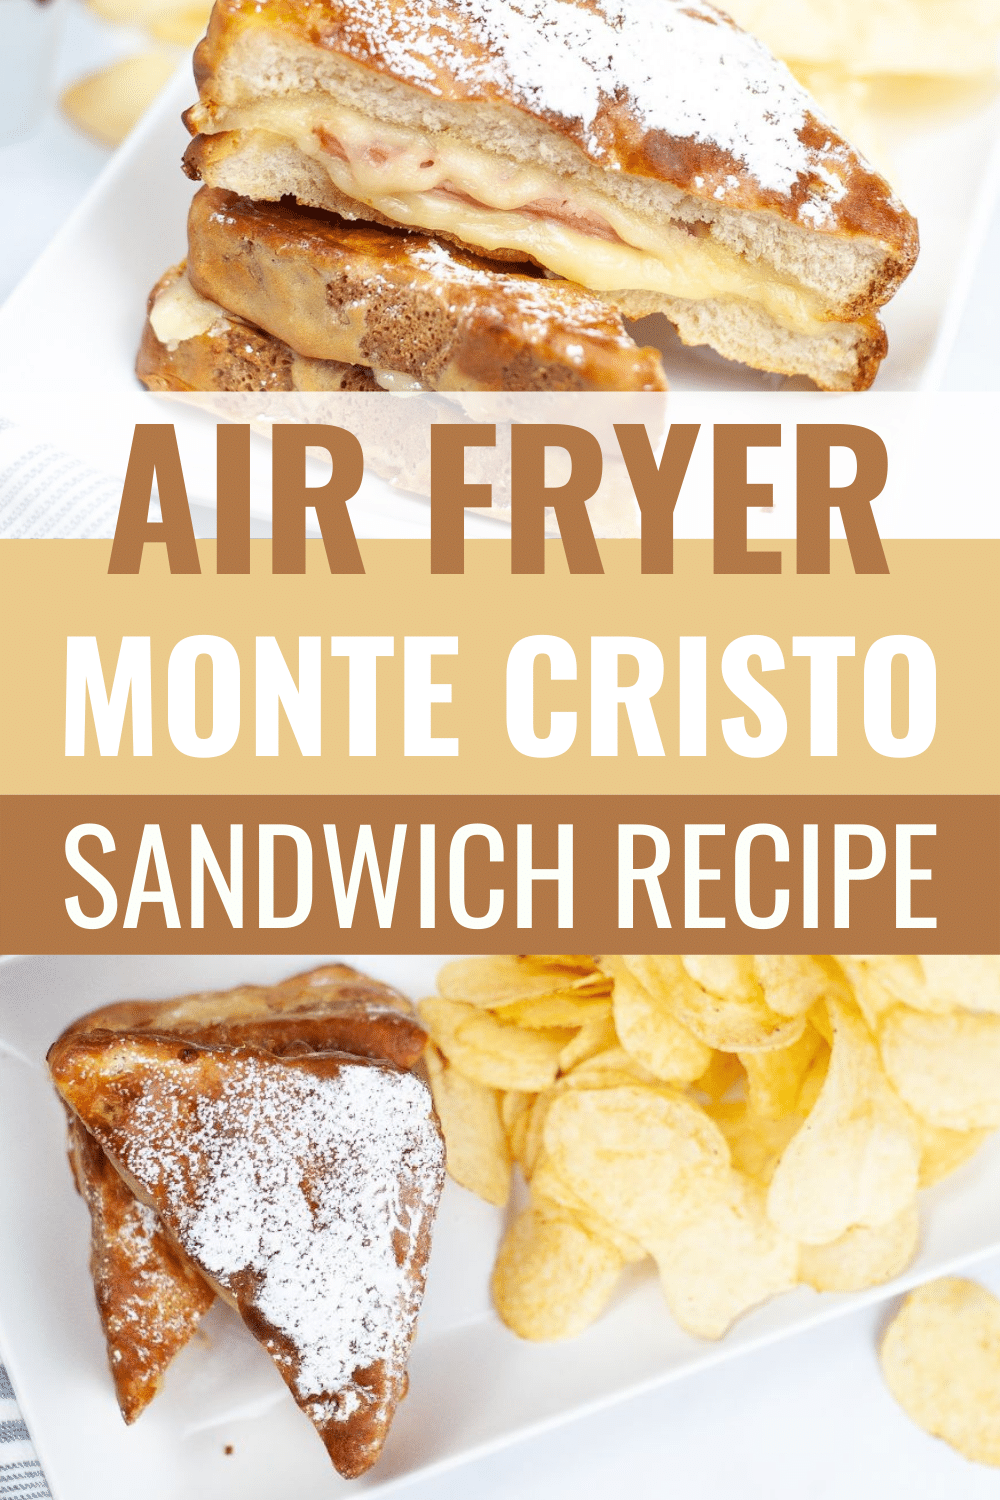 top image is a closeup of a monte cristo sandwich, bottom image is the sandwich next to potato chips on a white plate, with title text in between reading Air Fryer Monte Cristo Sandwich Recipe